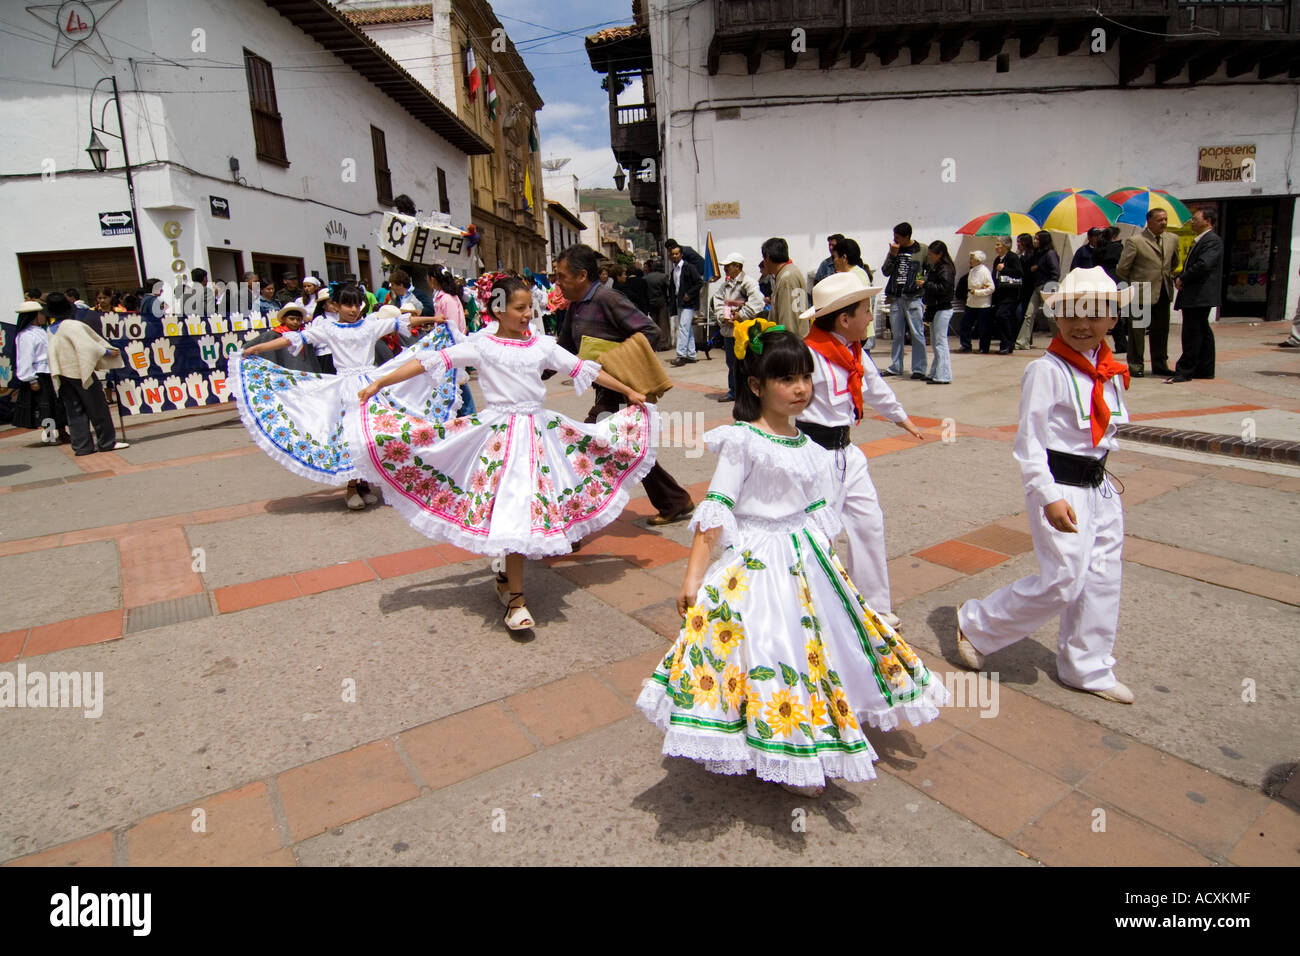 children as traditional cumbia dancers during a masquerade in the street, Tunja, Boyacá, Colombia, South America Stock Photo